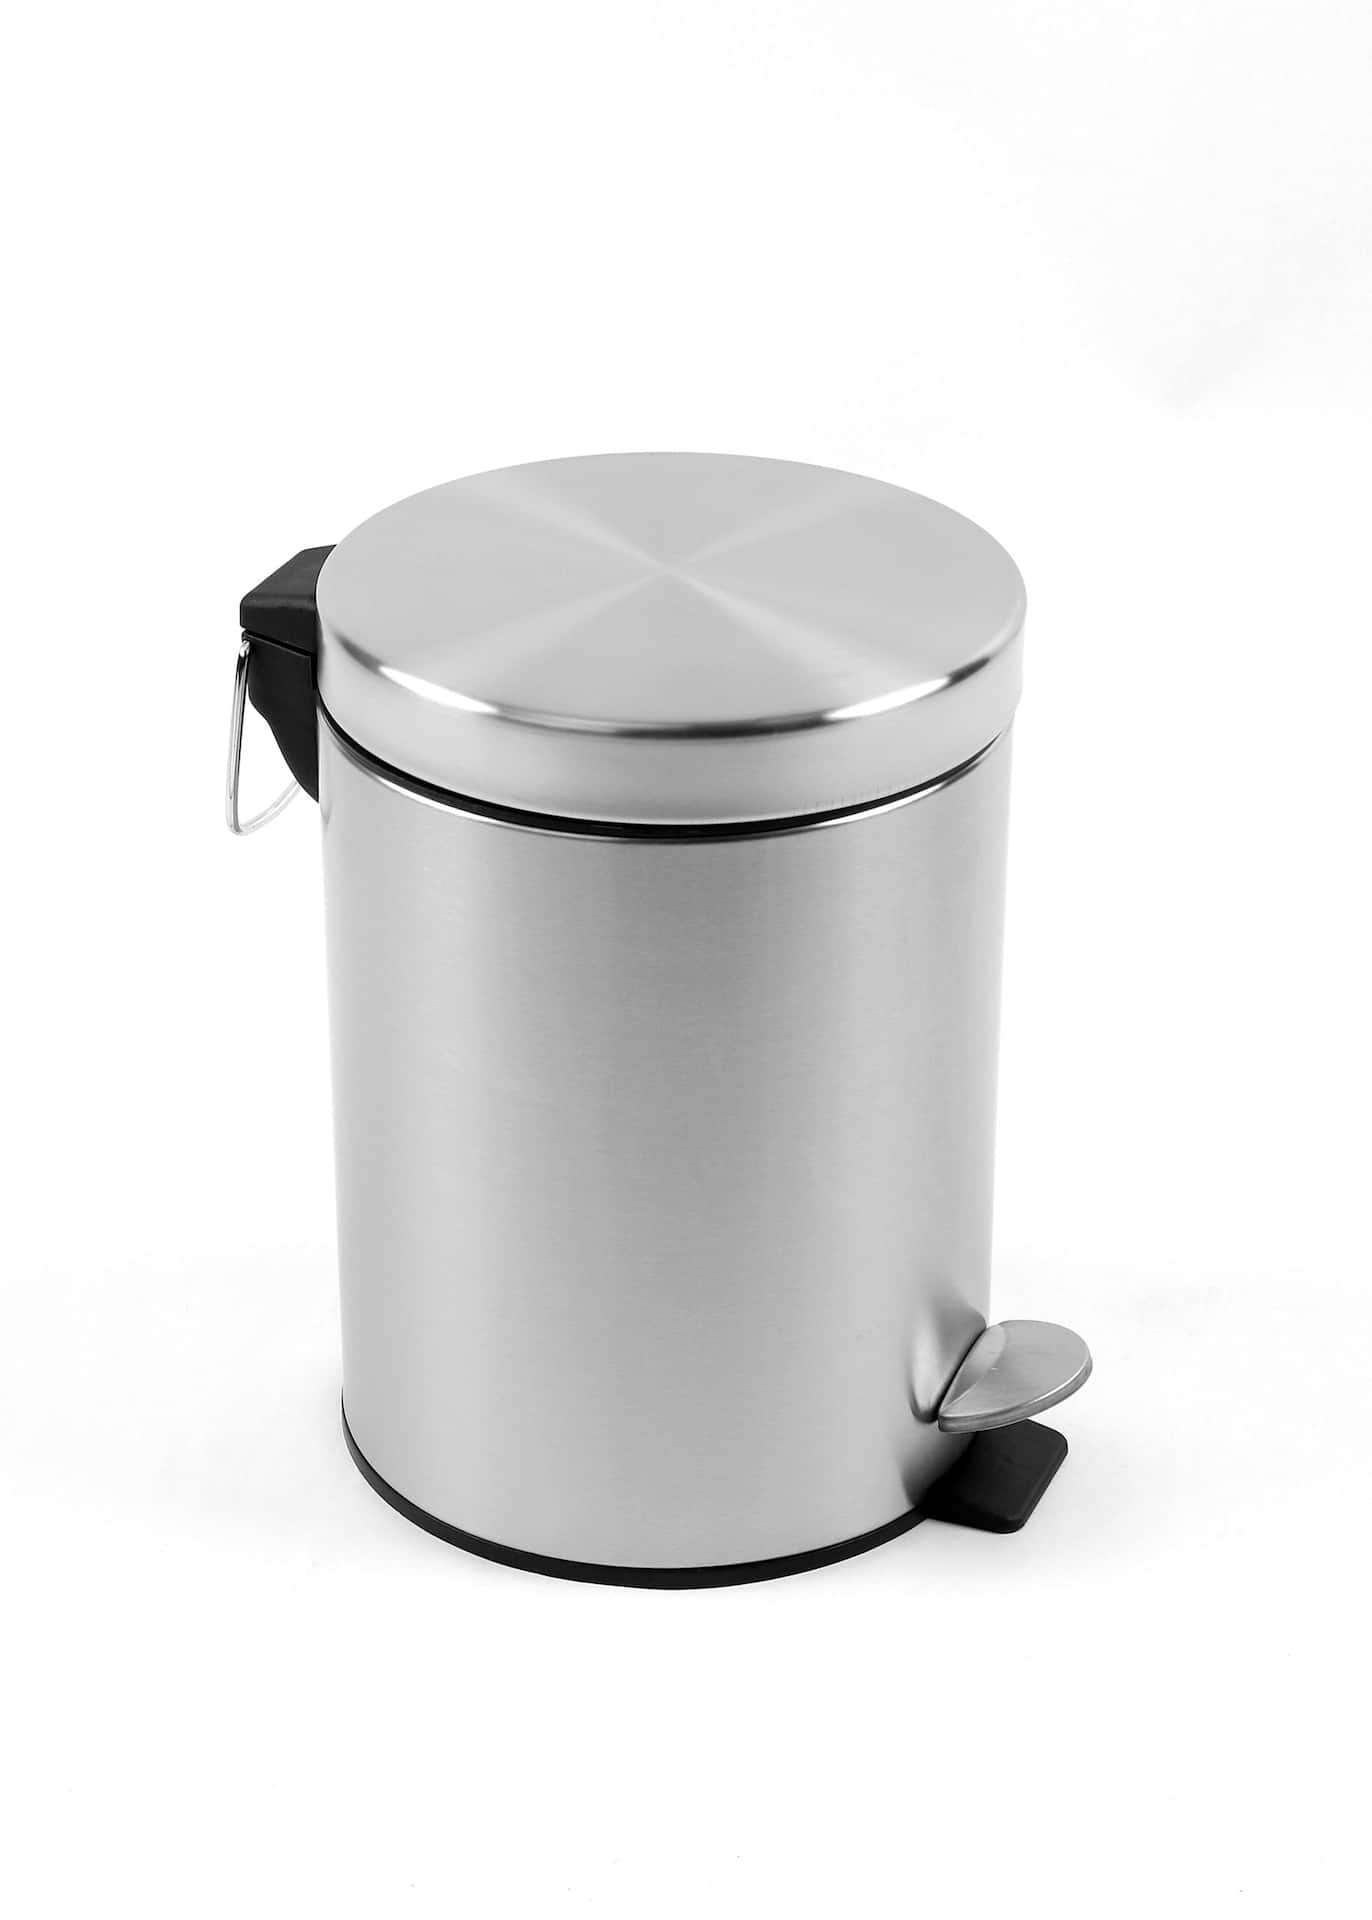 type A Mini Stainless Steel Circular Step Garbage Can, 5-L